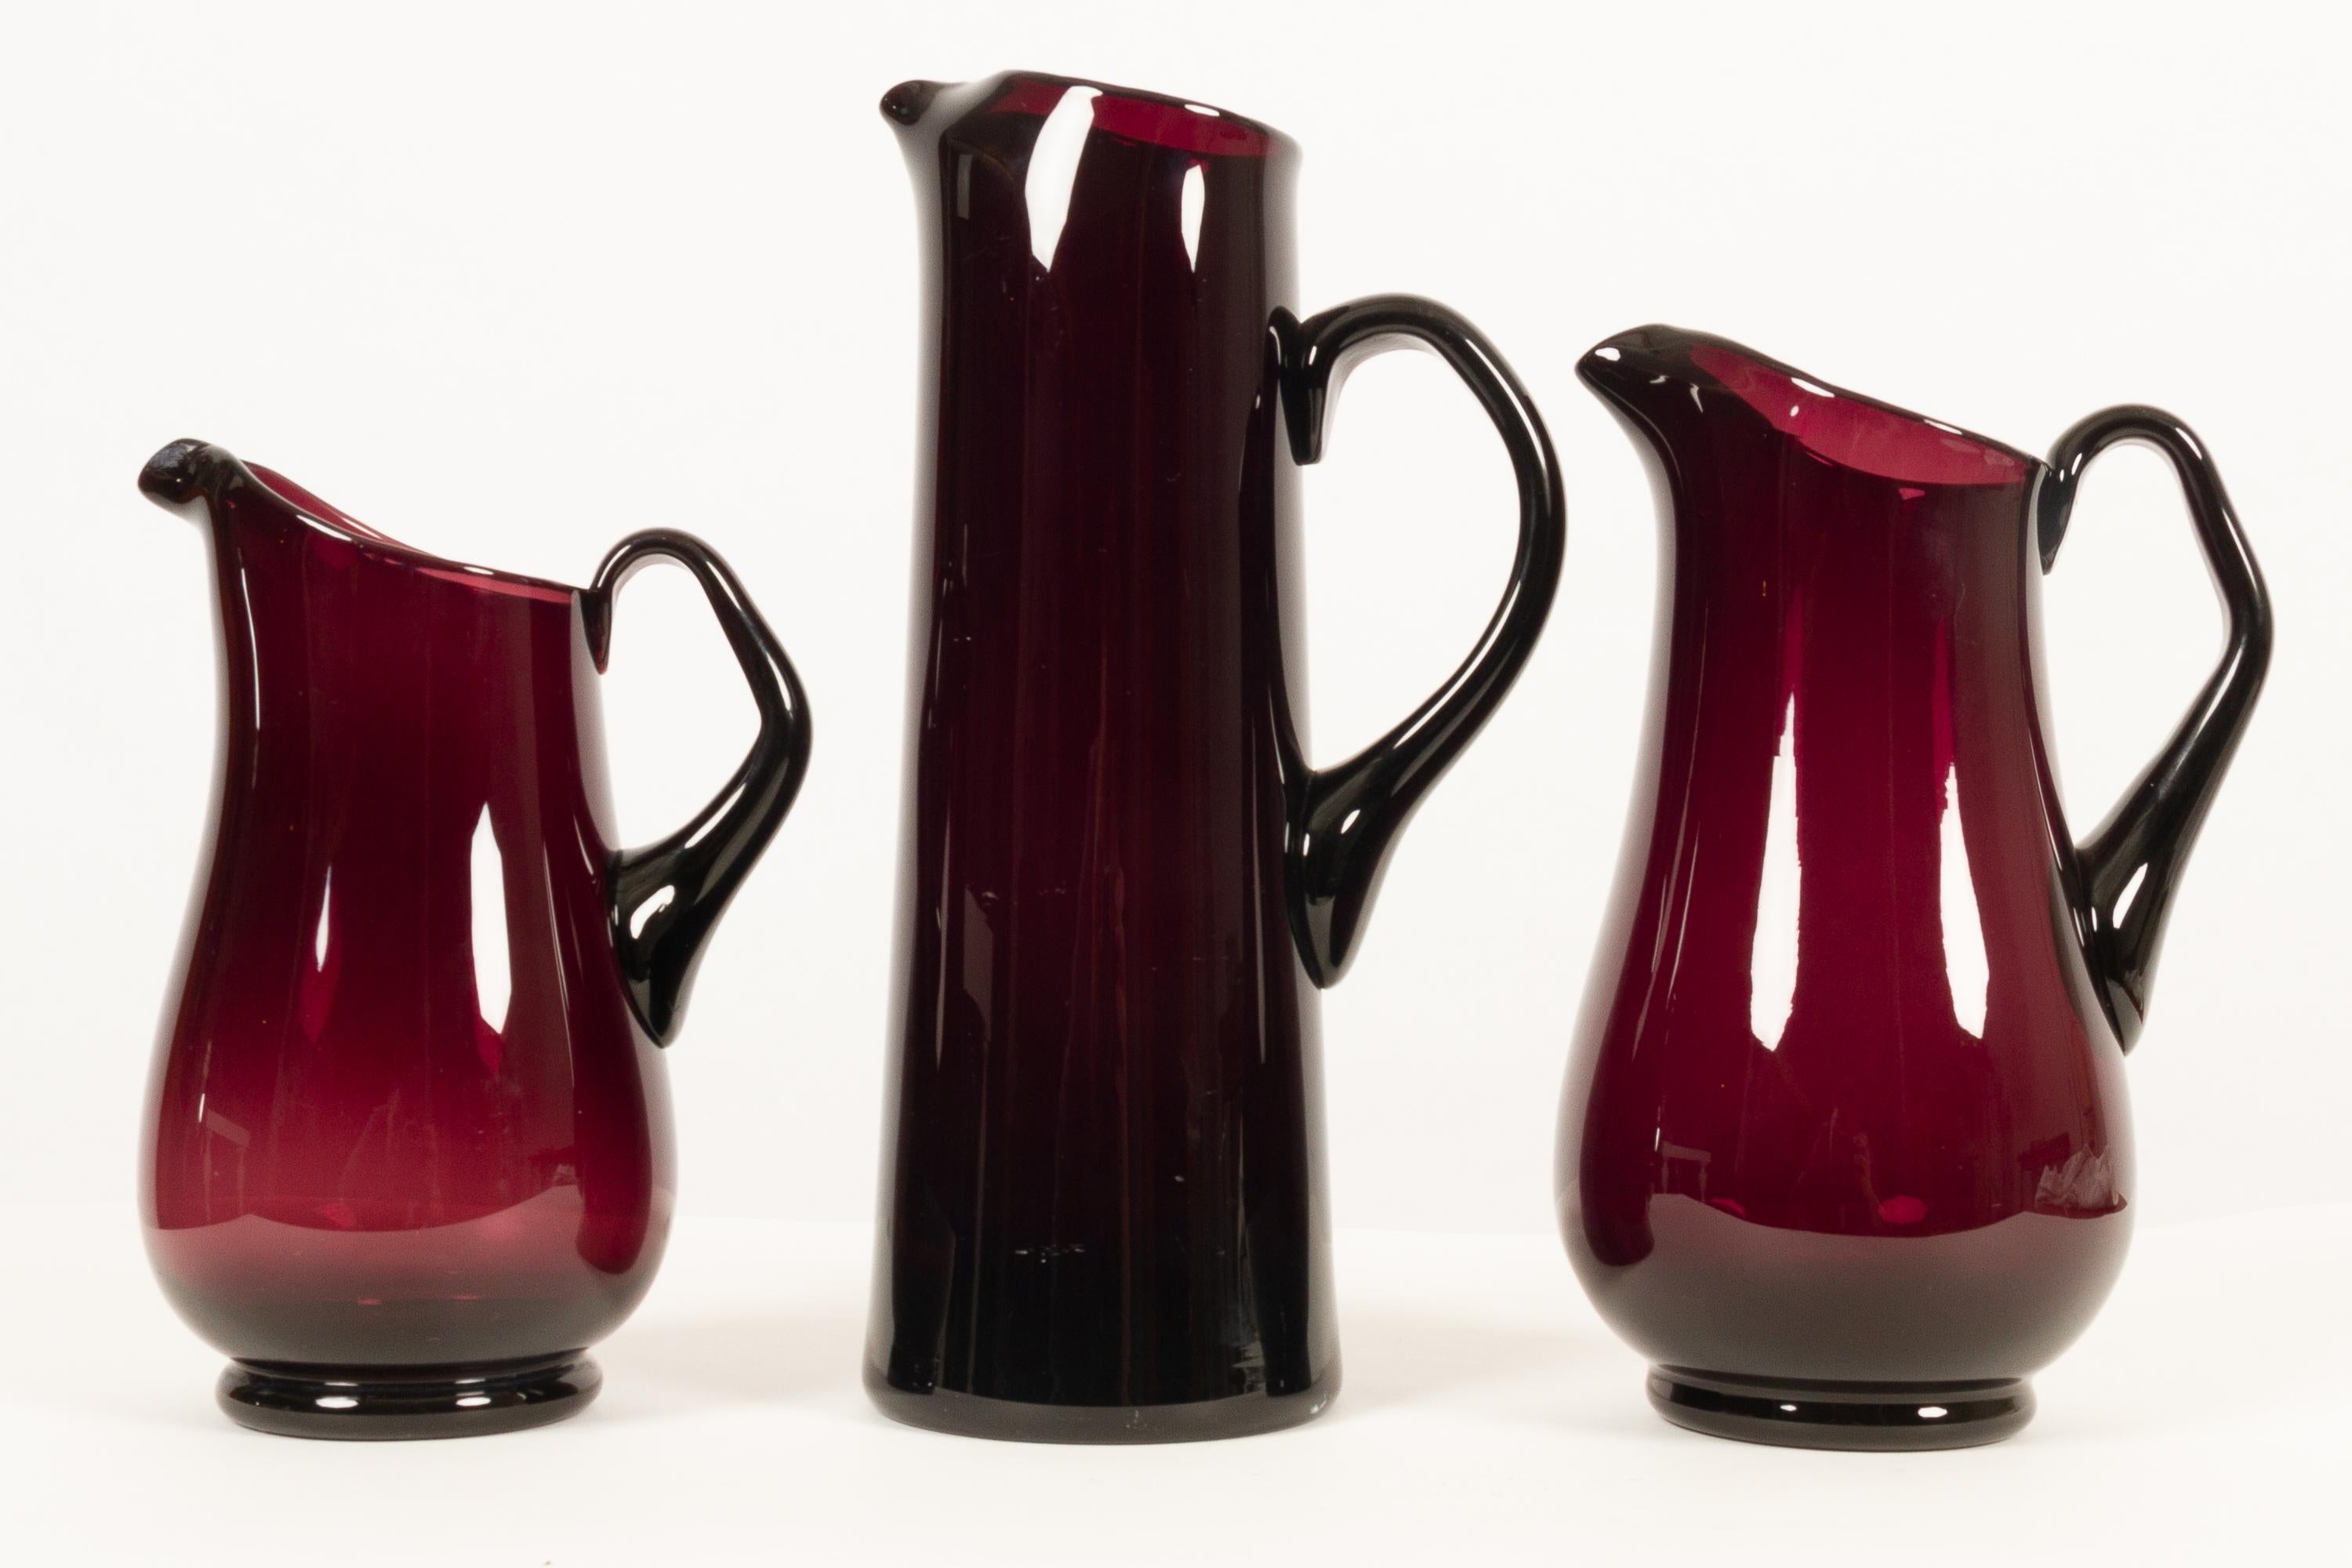 Vintage glass pitchers by Per Lütken for Holmegaard 1950s
Set of vintage Danish Mid-Century Modern mouth-blown pitchers in beautiful and rare plum colored glass. Designed by Per Lütken for Danish glasswork Holmegaard.
This set contains of three